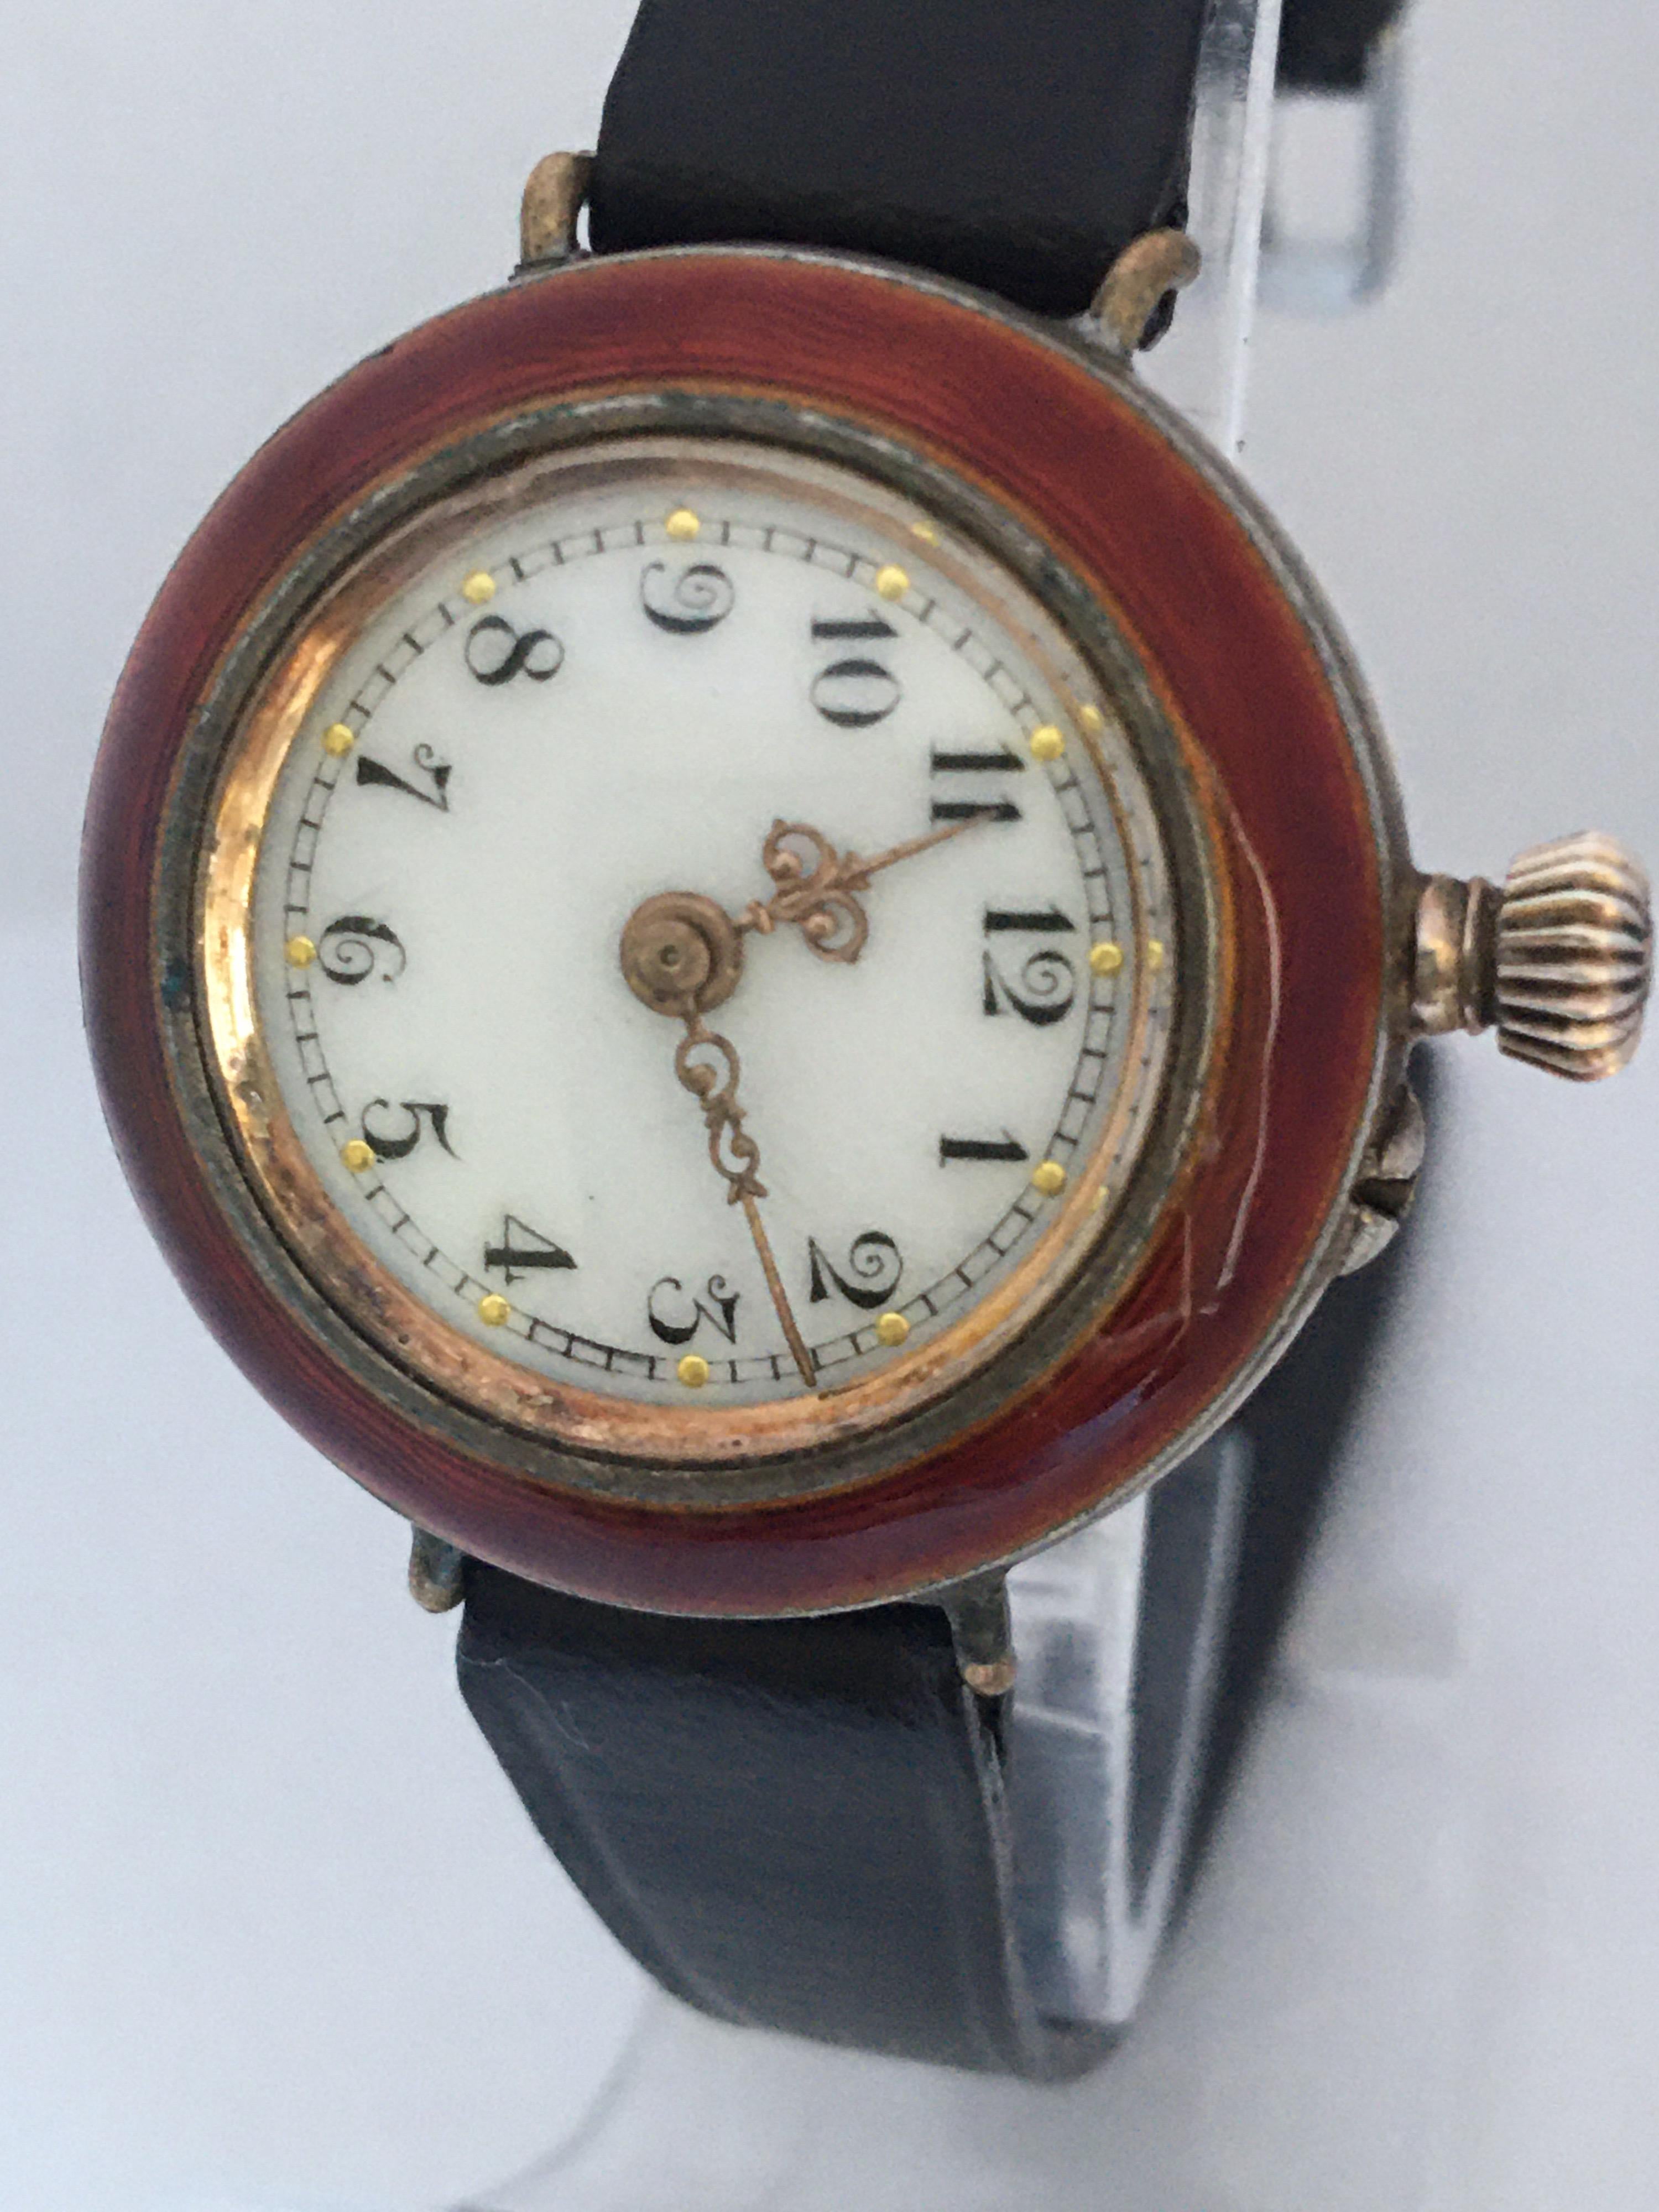 This beautiful Victoriano period hand winding and pin setting ladies trench watch is working and it is ticking well but I cannot guarantee the time accuracy. 
Visible signs of ageing and wear with light tiny scratches on the watch case as